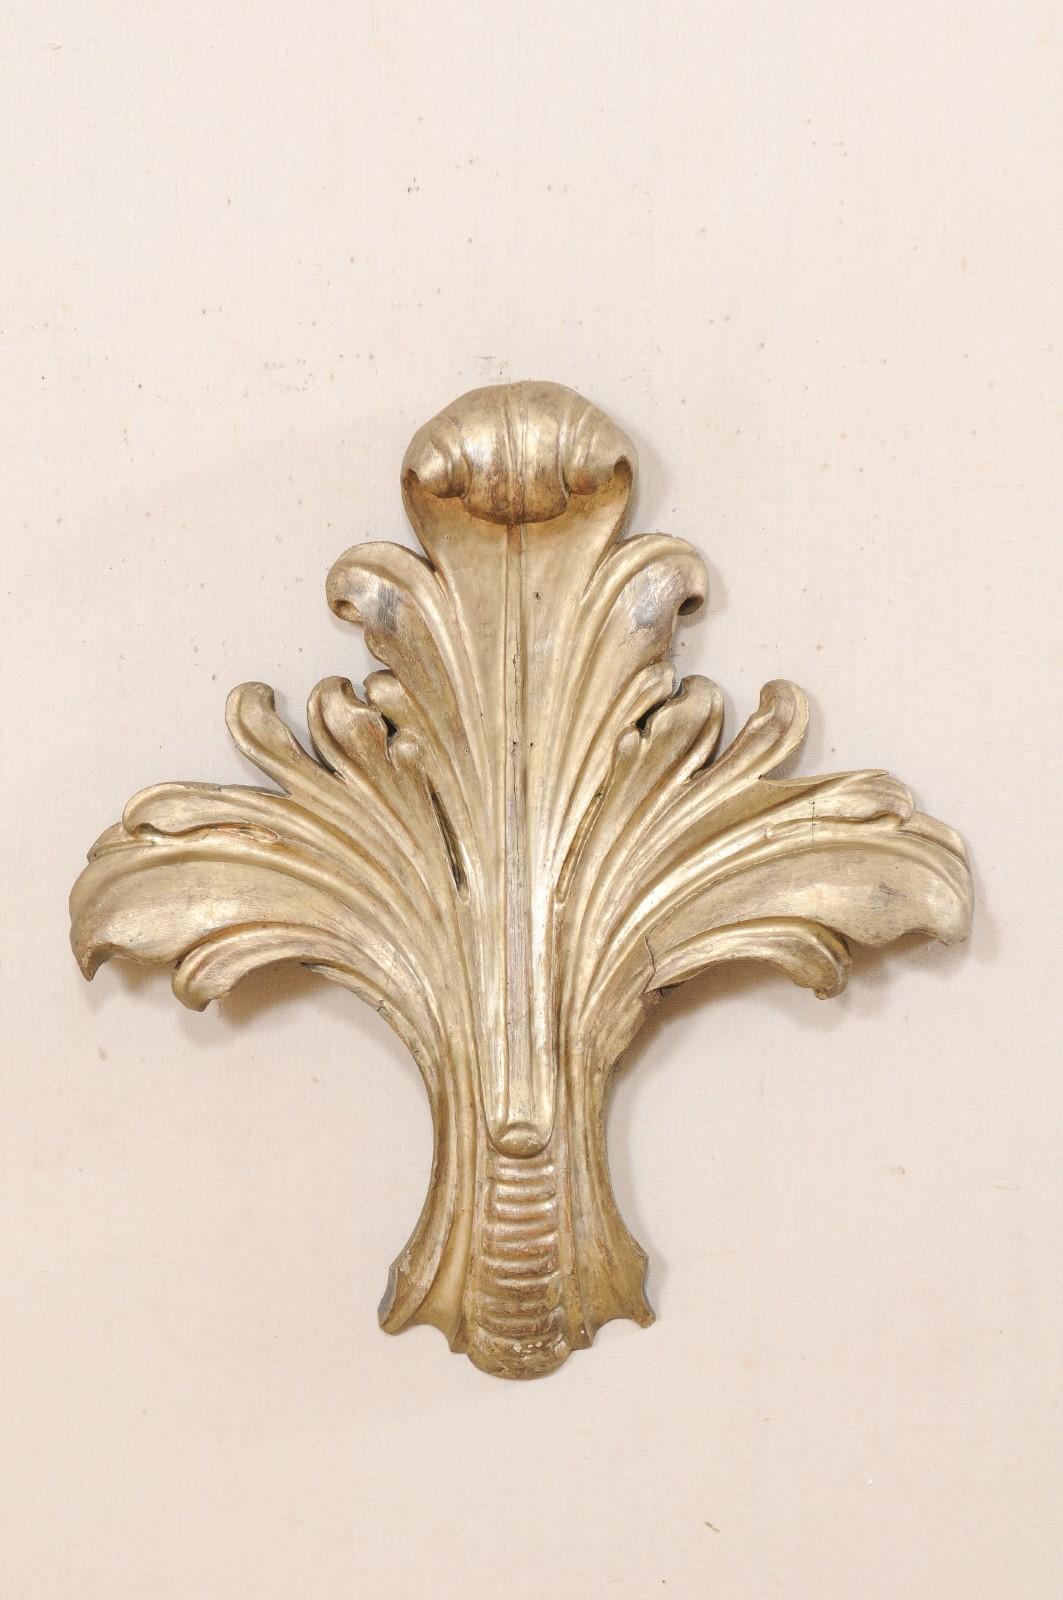 An Italian foliage carved-wood wall decoration from the 19th century. This antique wood wall hanging from Italy, standing approximately 33.5 inches in height, features a stylized hand carved acanthus plume with a curled tip and gently bowed side